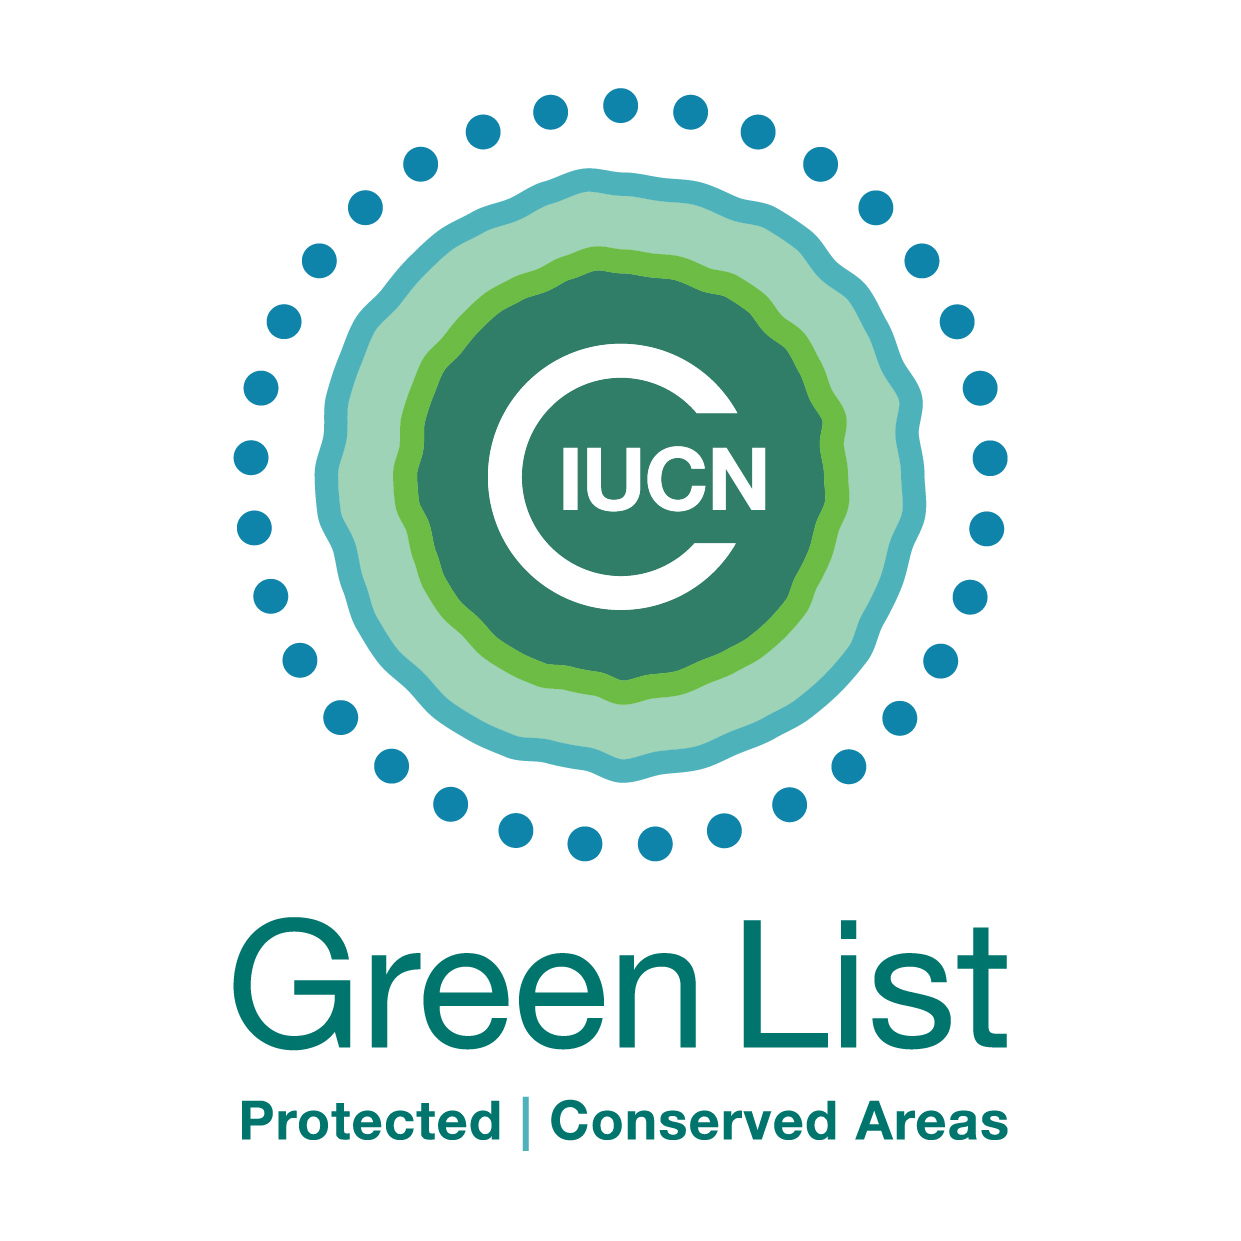 IUCN_Green_List_of_Protected_and_Conserved_Areas.jpg